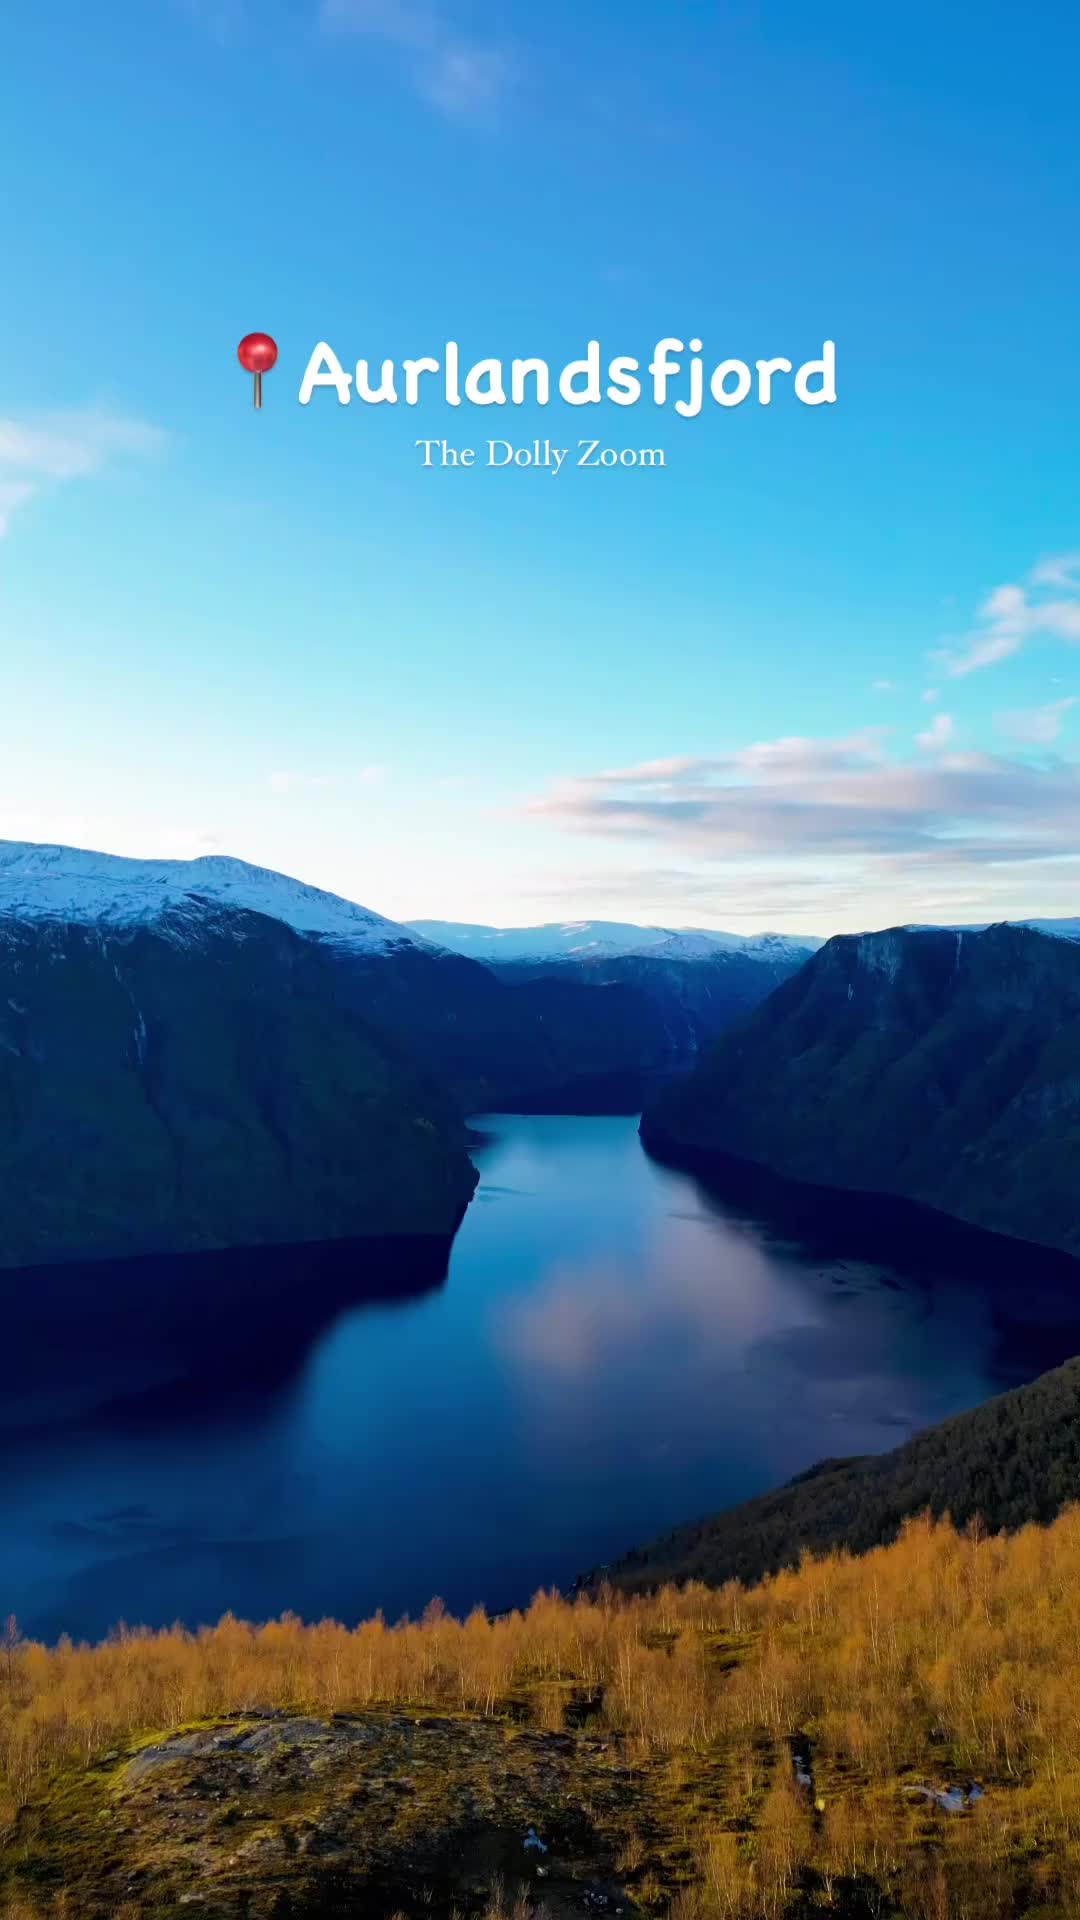 Aurlandsfjord with Stunning Dolly Zoom Effect